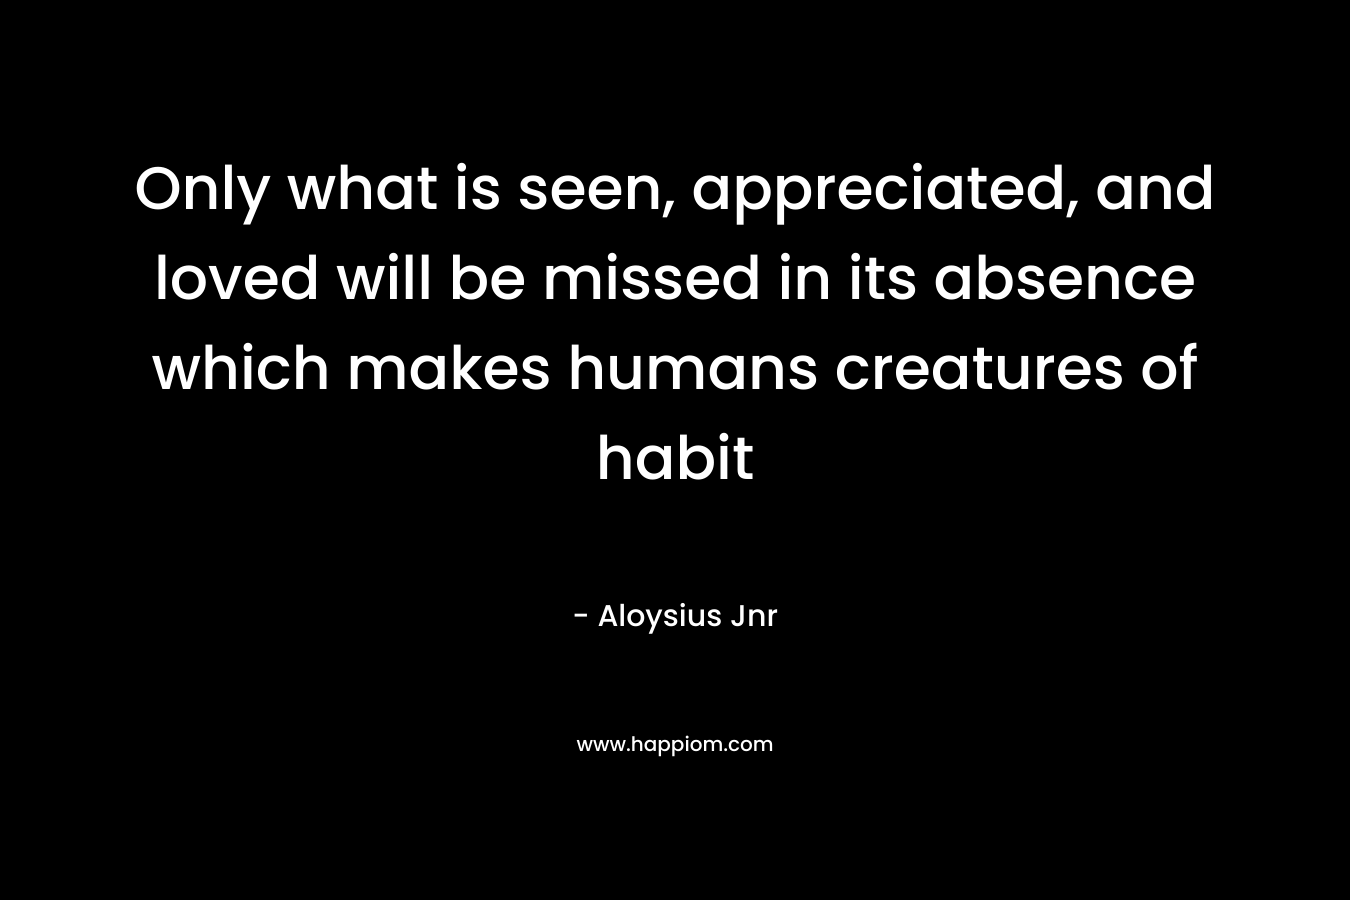 Only what is seen, appreciated, and loved will be missed in its absence which makes humans creatures of habit